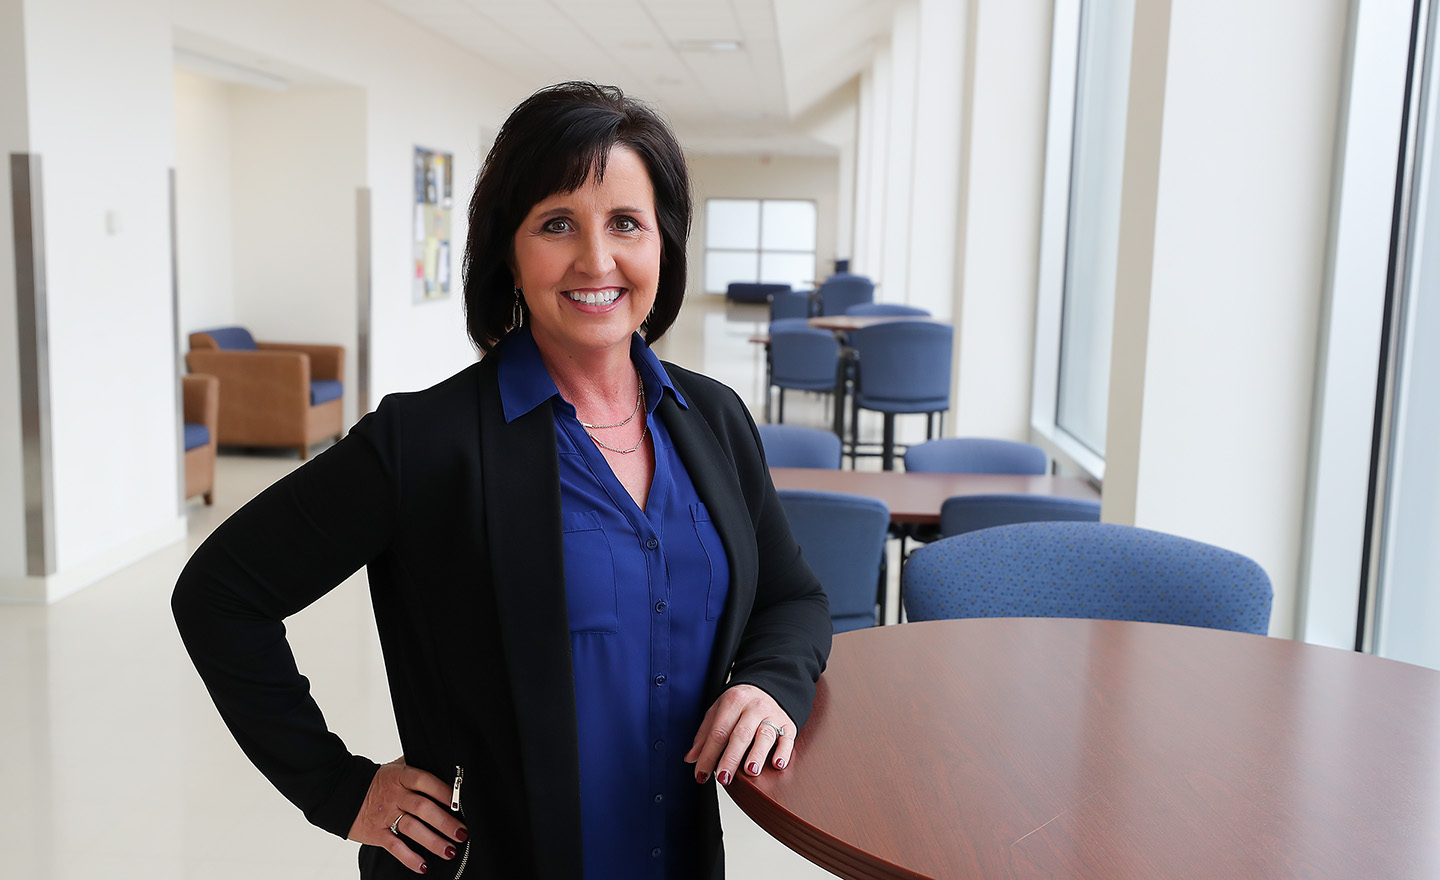 “We’re well positioned to provide opportunities to students from rural areas. The majority of students at UNK are from rural Nebraska, they’re interested in training in Nebraska, and they’re interested in returning to the places they know and love," Peggy Abels said.